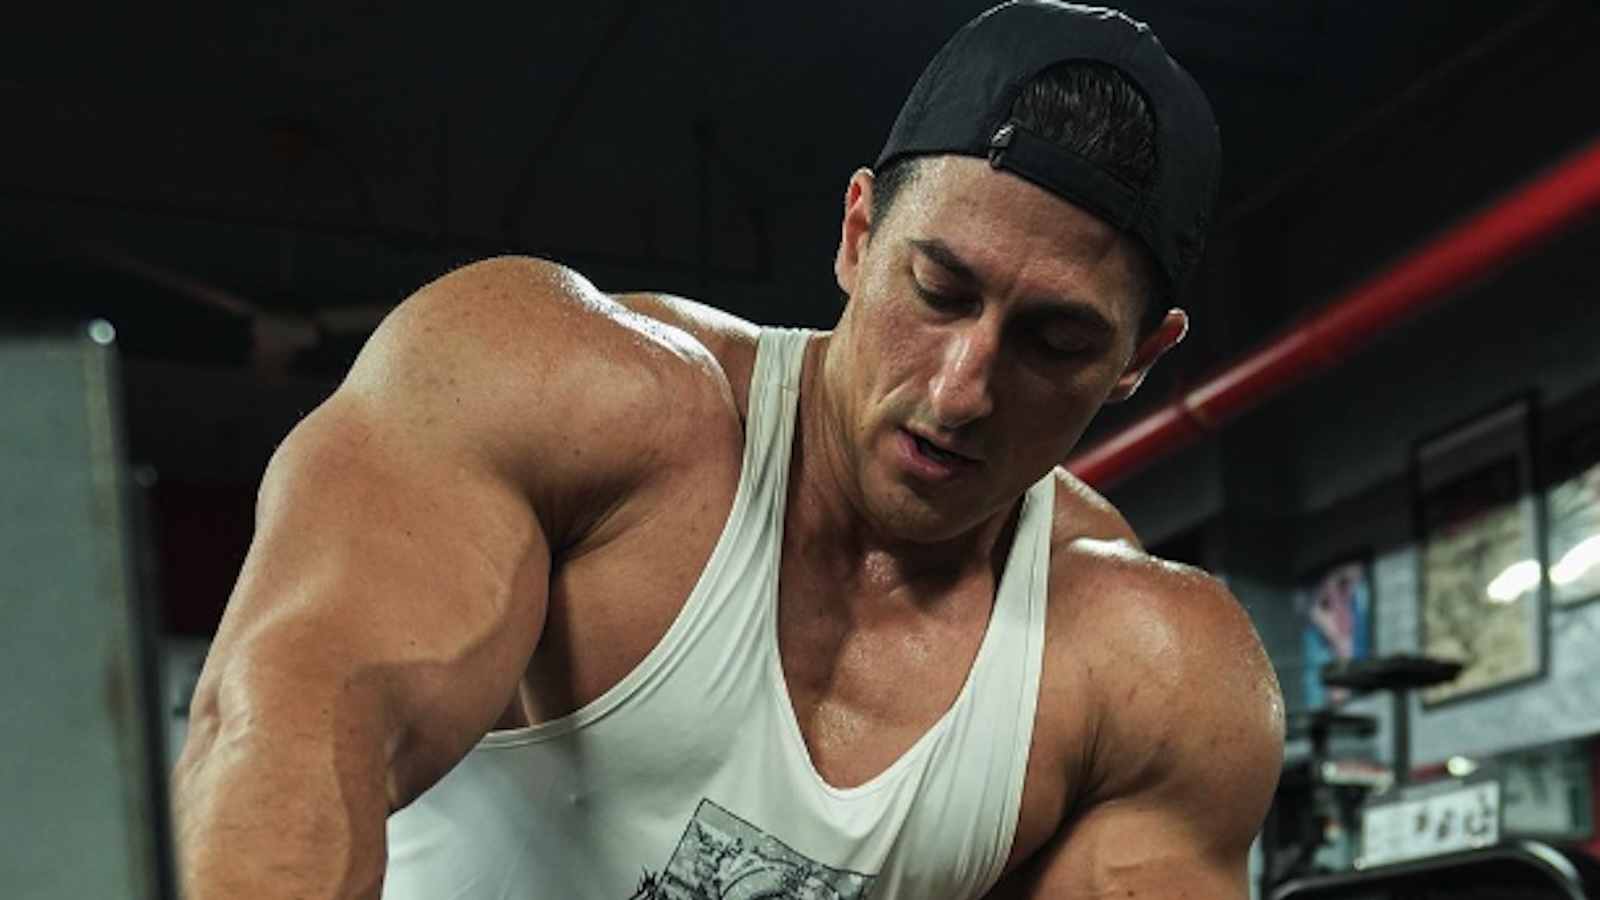 Bodybuilder Sadik Hadzovic’s 3 Must-Eat Meals for Muscle-Building [Video]